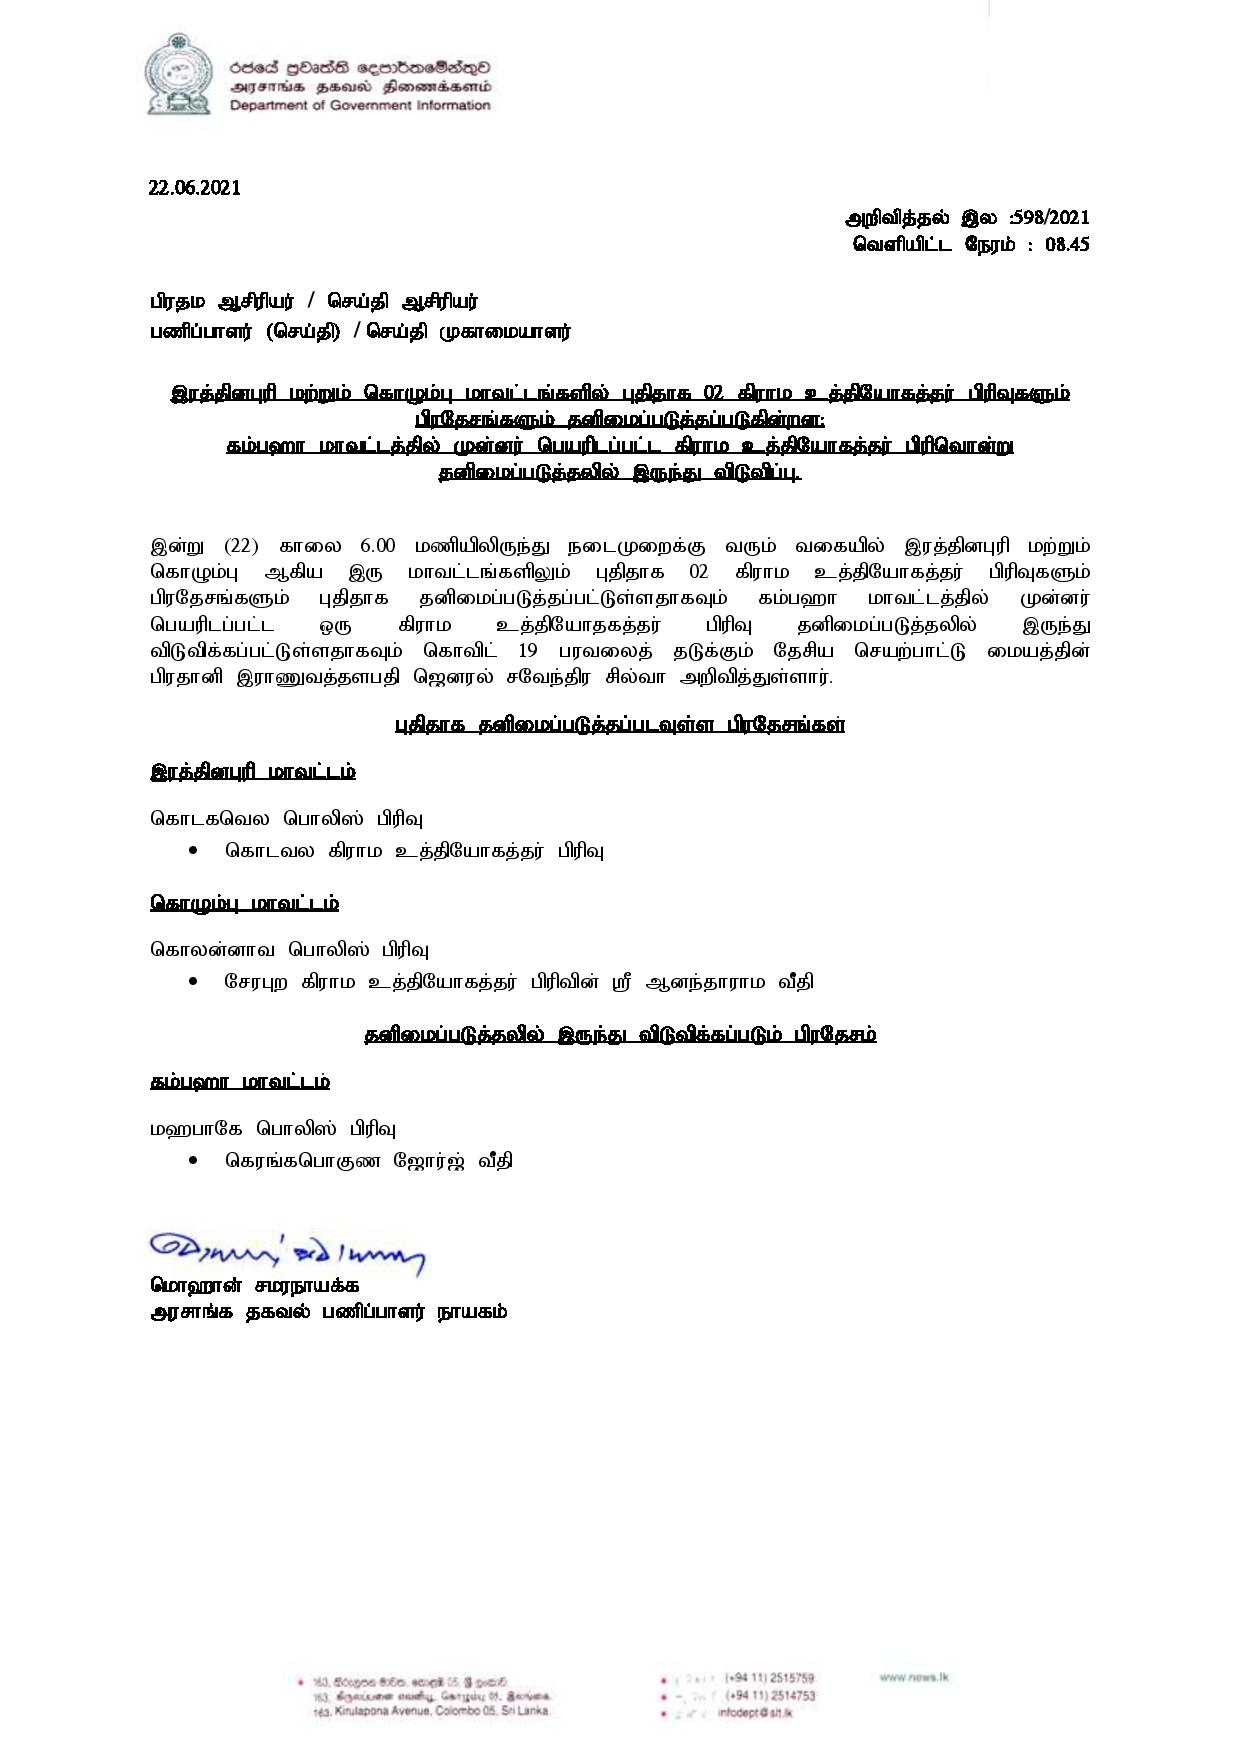 Press Release 598 Tamil page 001